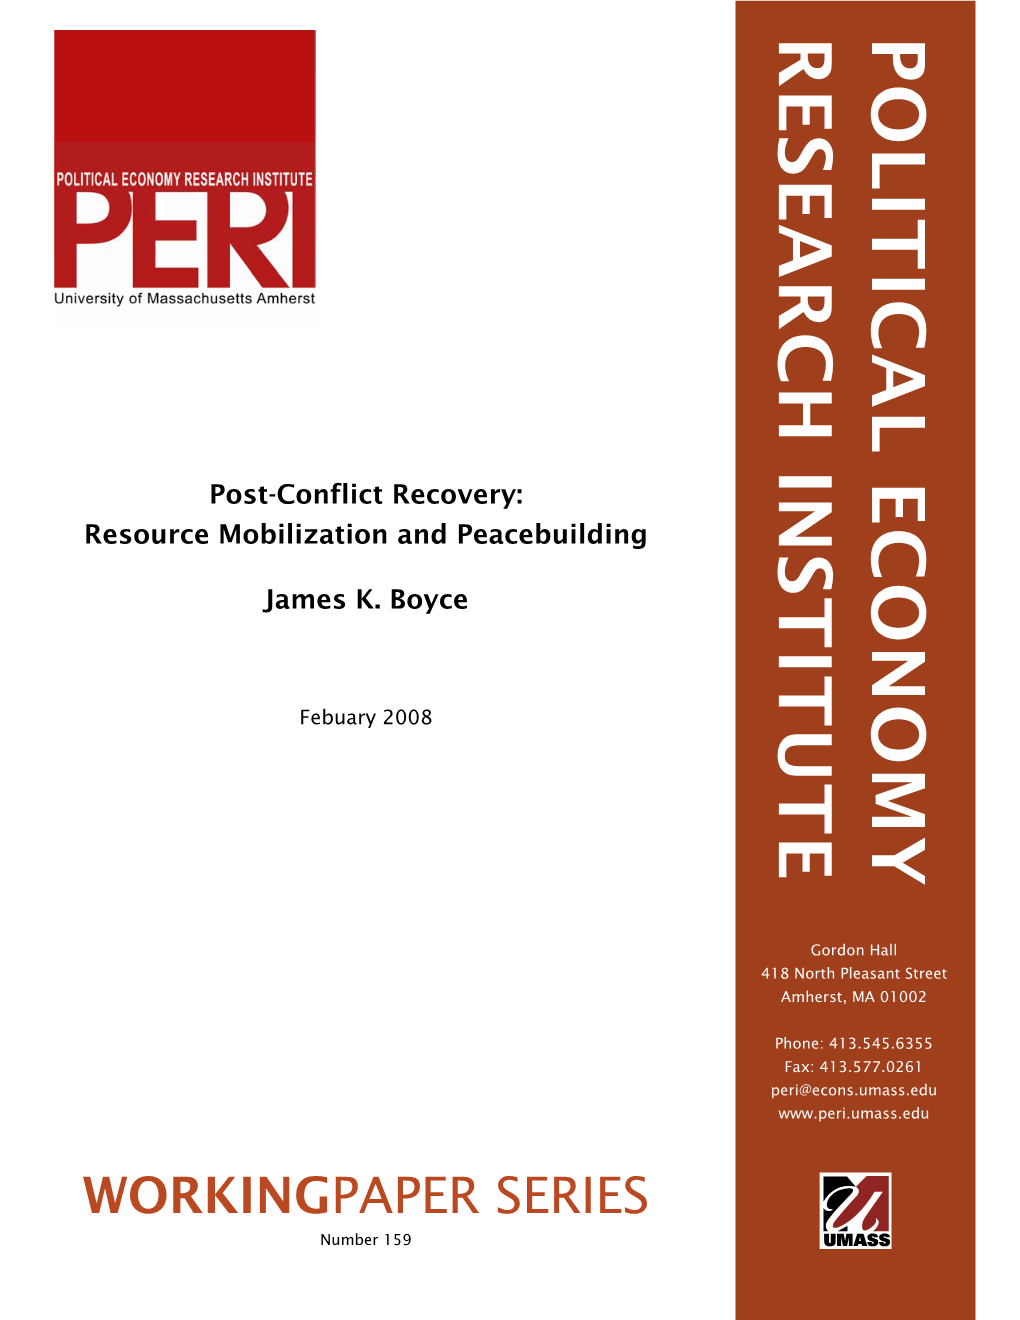 Resource Mobilization and Peacebuilding Resource Mobilization WORKING